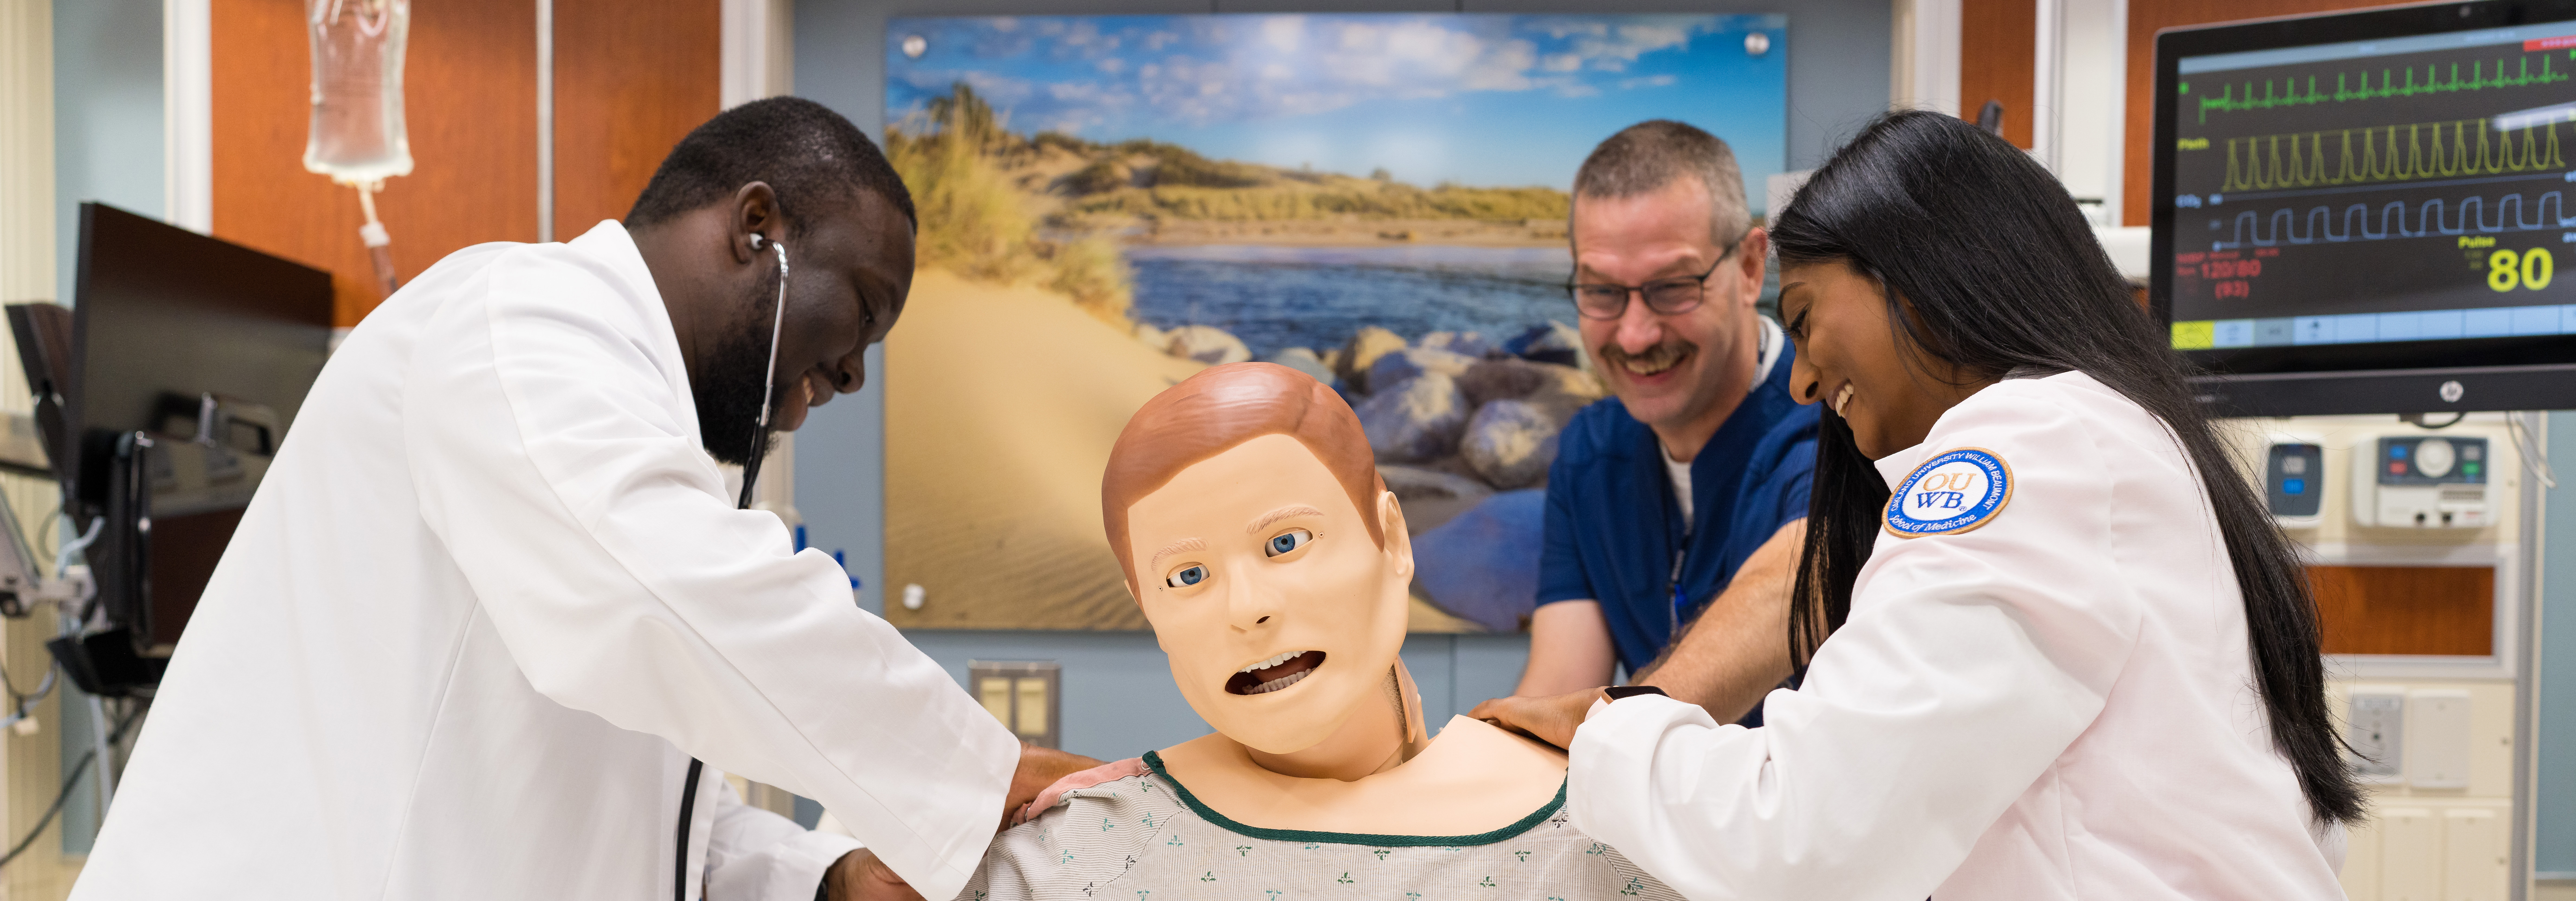 An image of students in OUWB's Clinical Skills Center